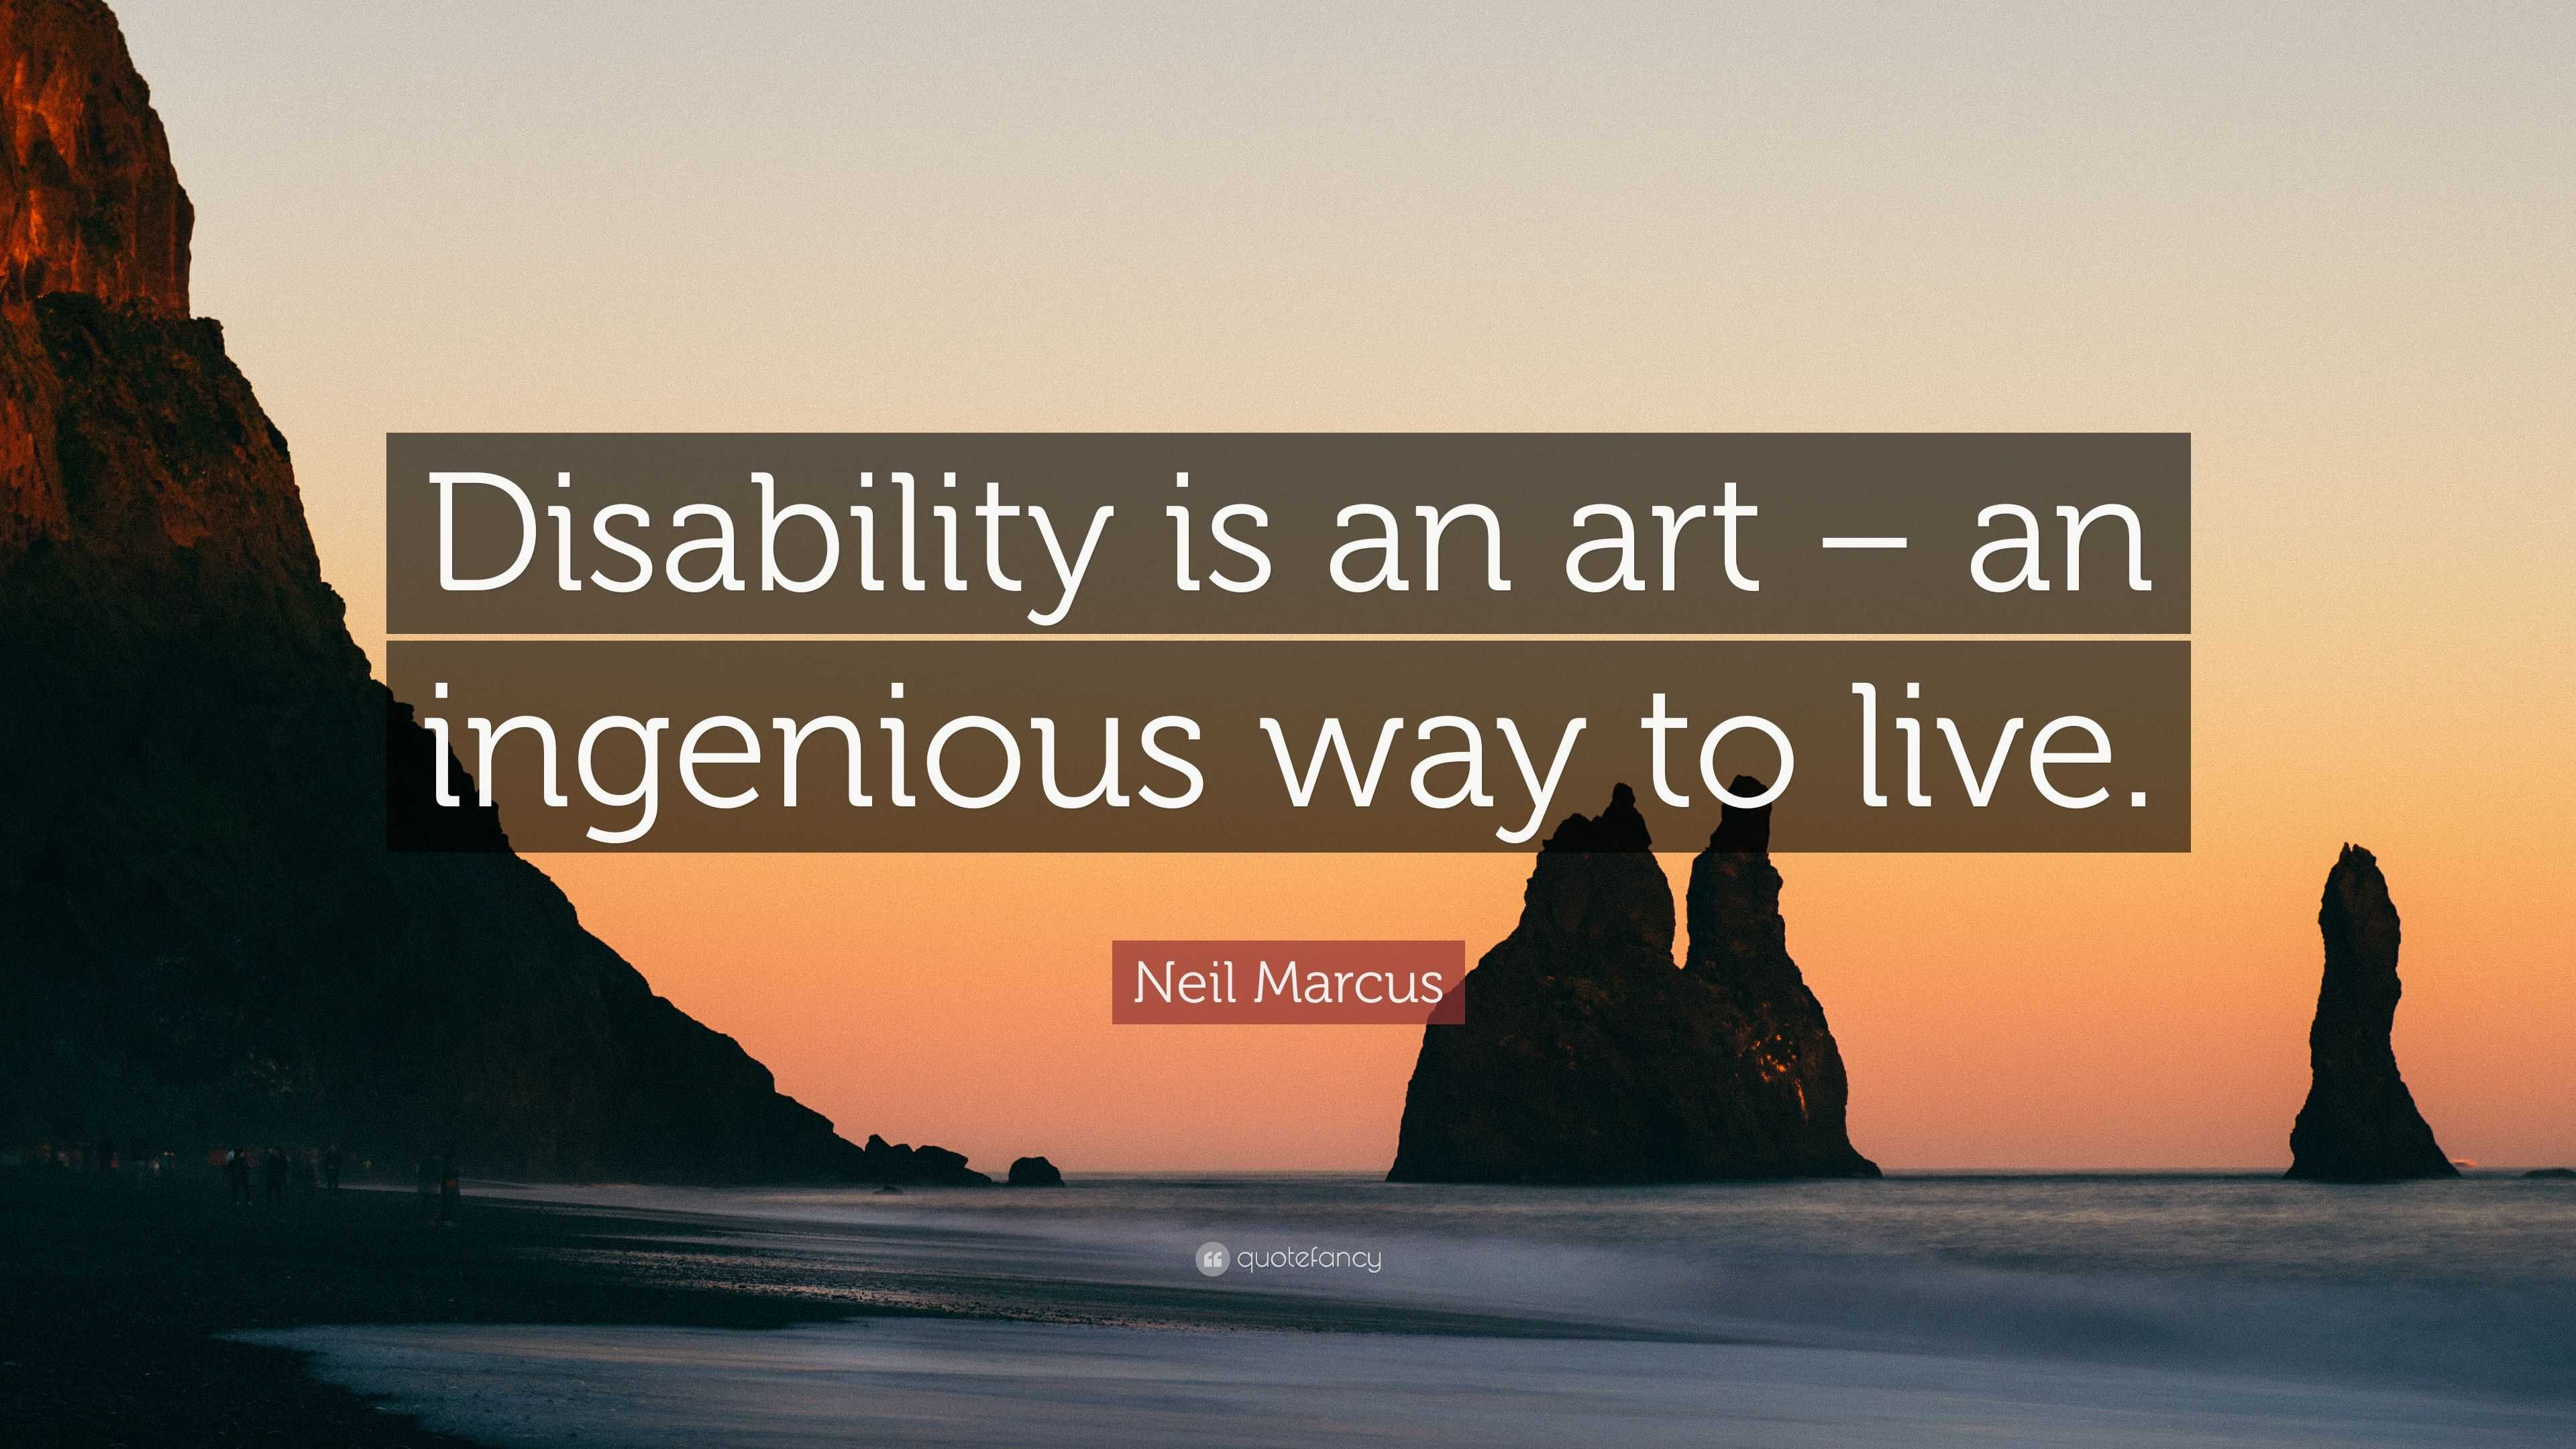 Disability is not a brave struggle Disability is an art. Slick